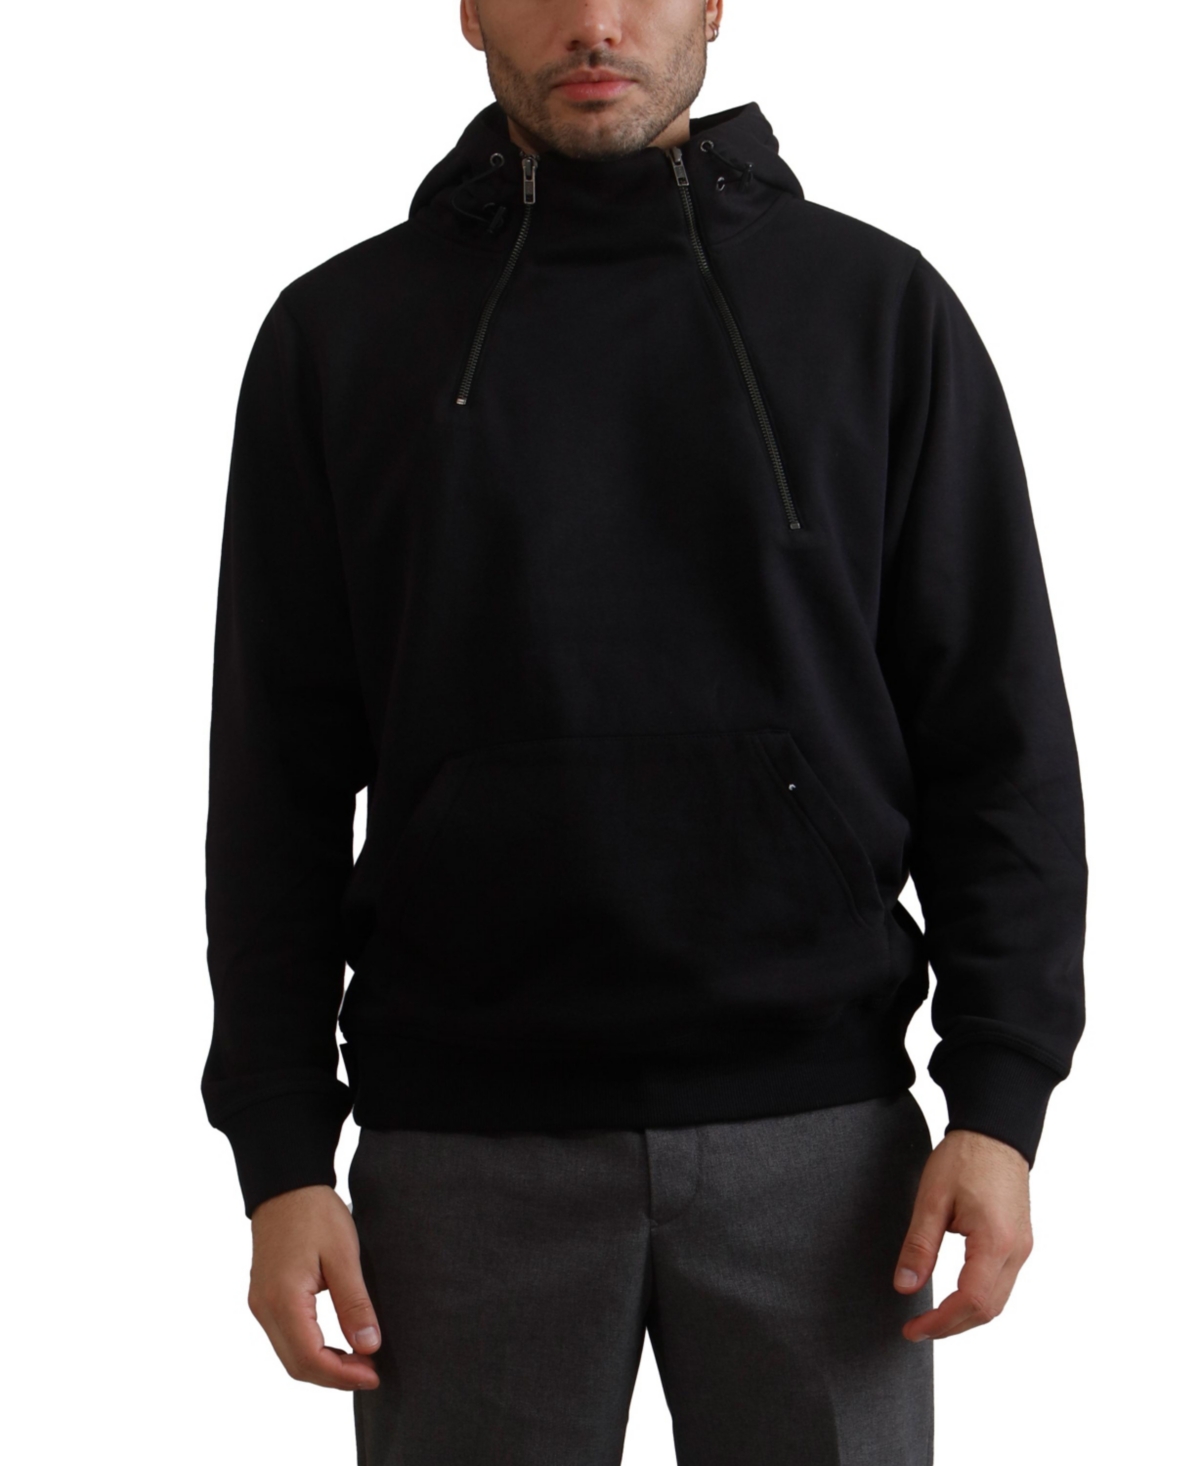 MEMBERS ONLY MEN'S TAYLOR DOUBLE ZIPPER PULLOVER HOODIE